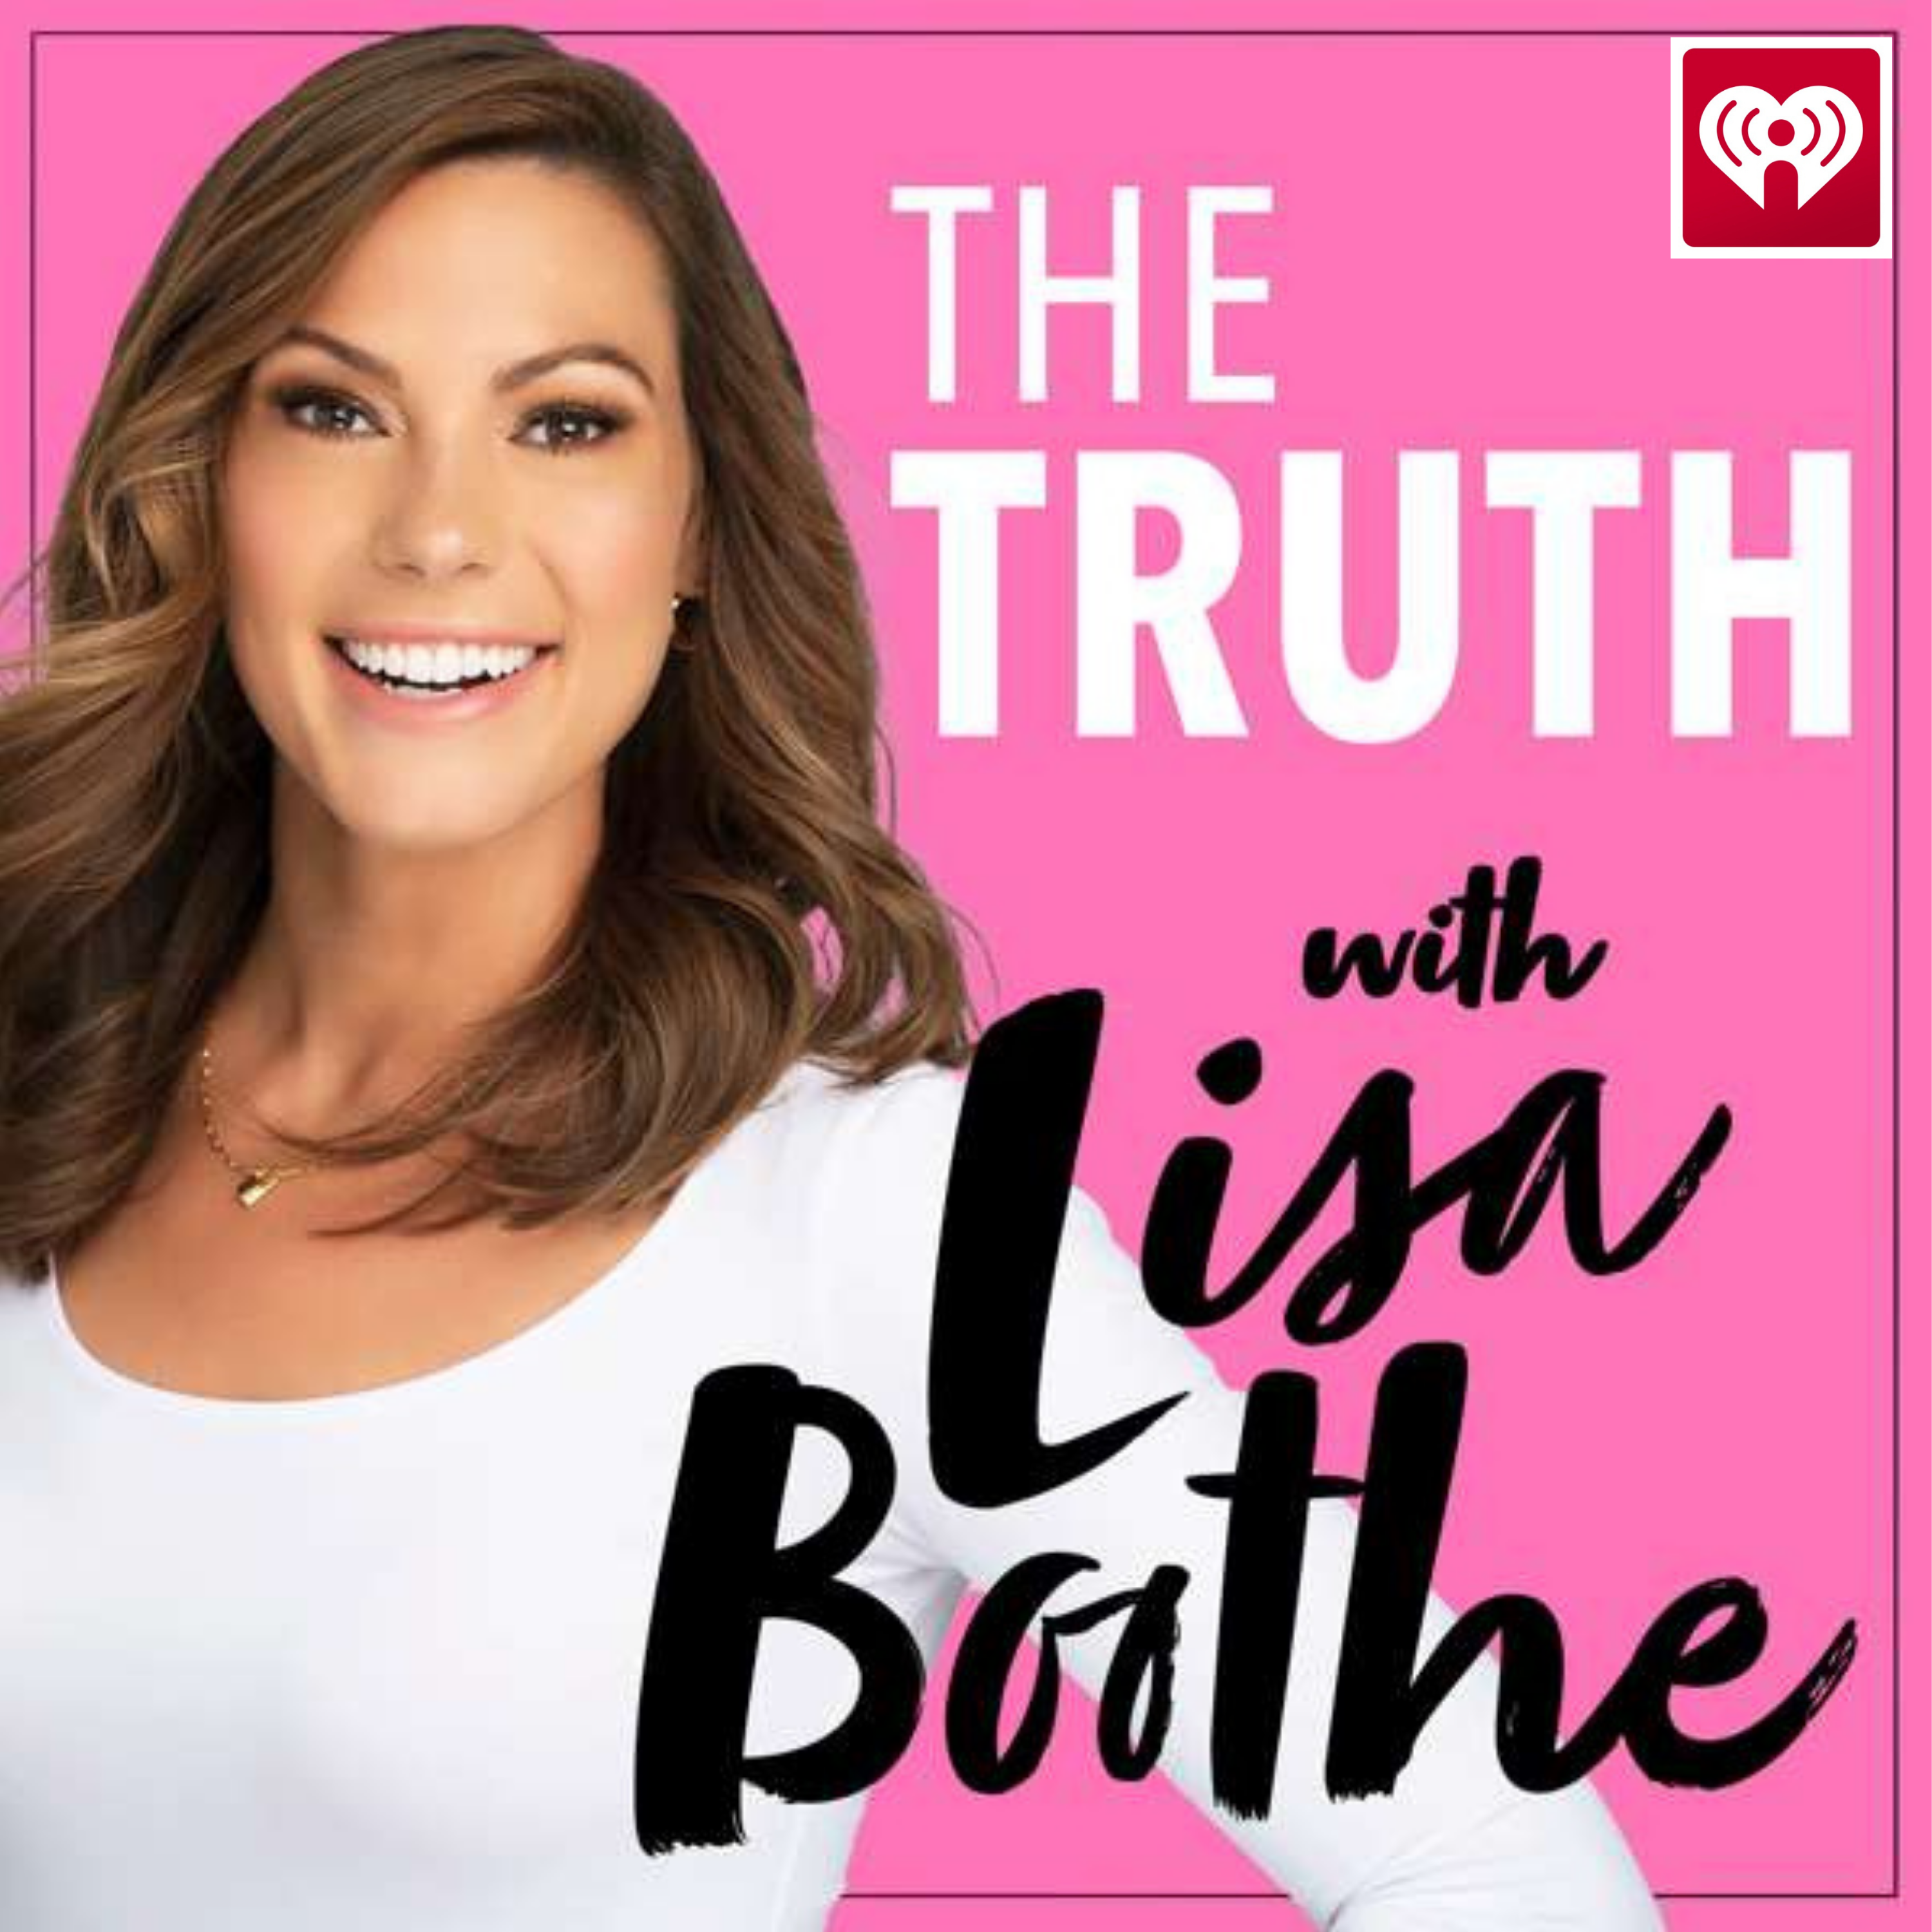 The Truth with Lisa Boothe: The Truth Behind the Afghanistan Withdrawal